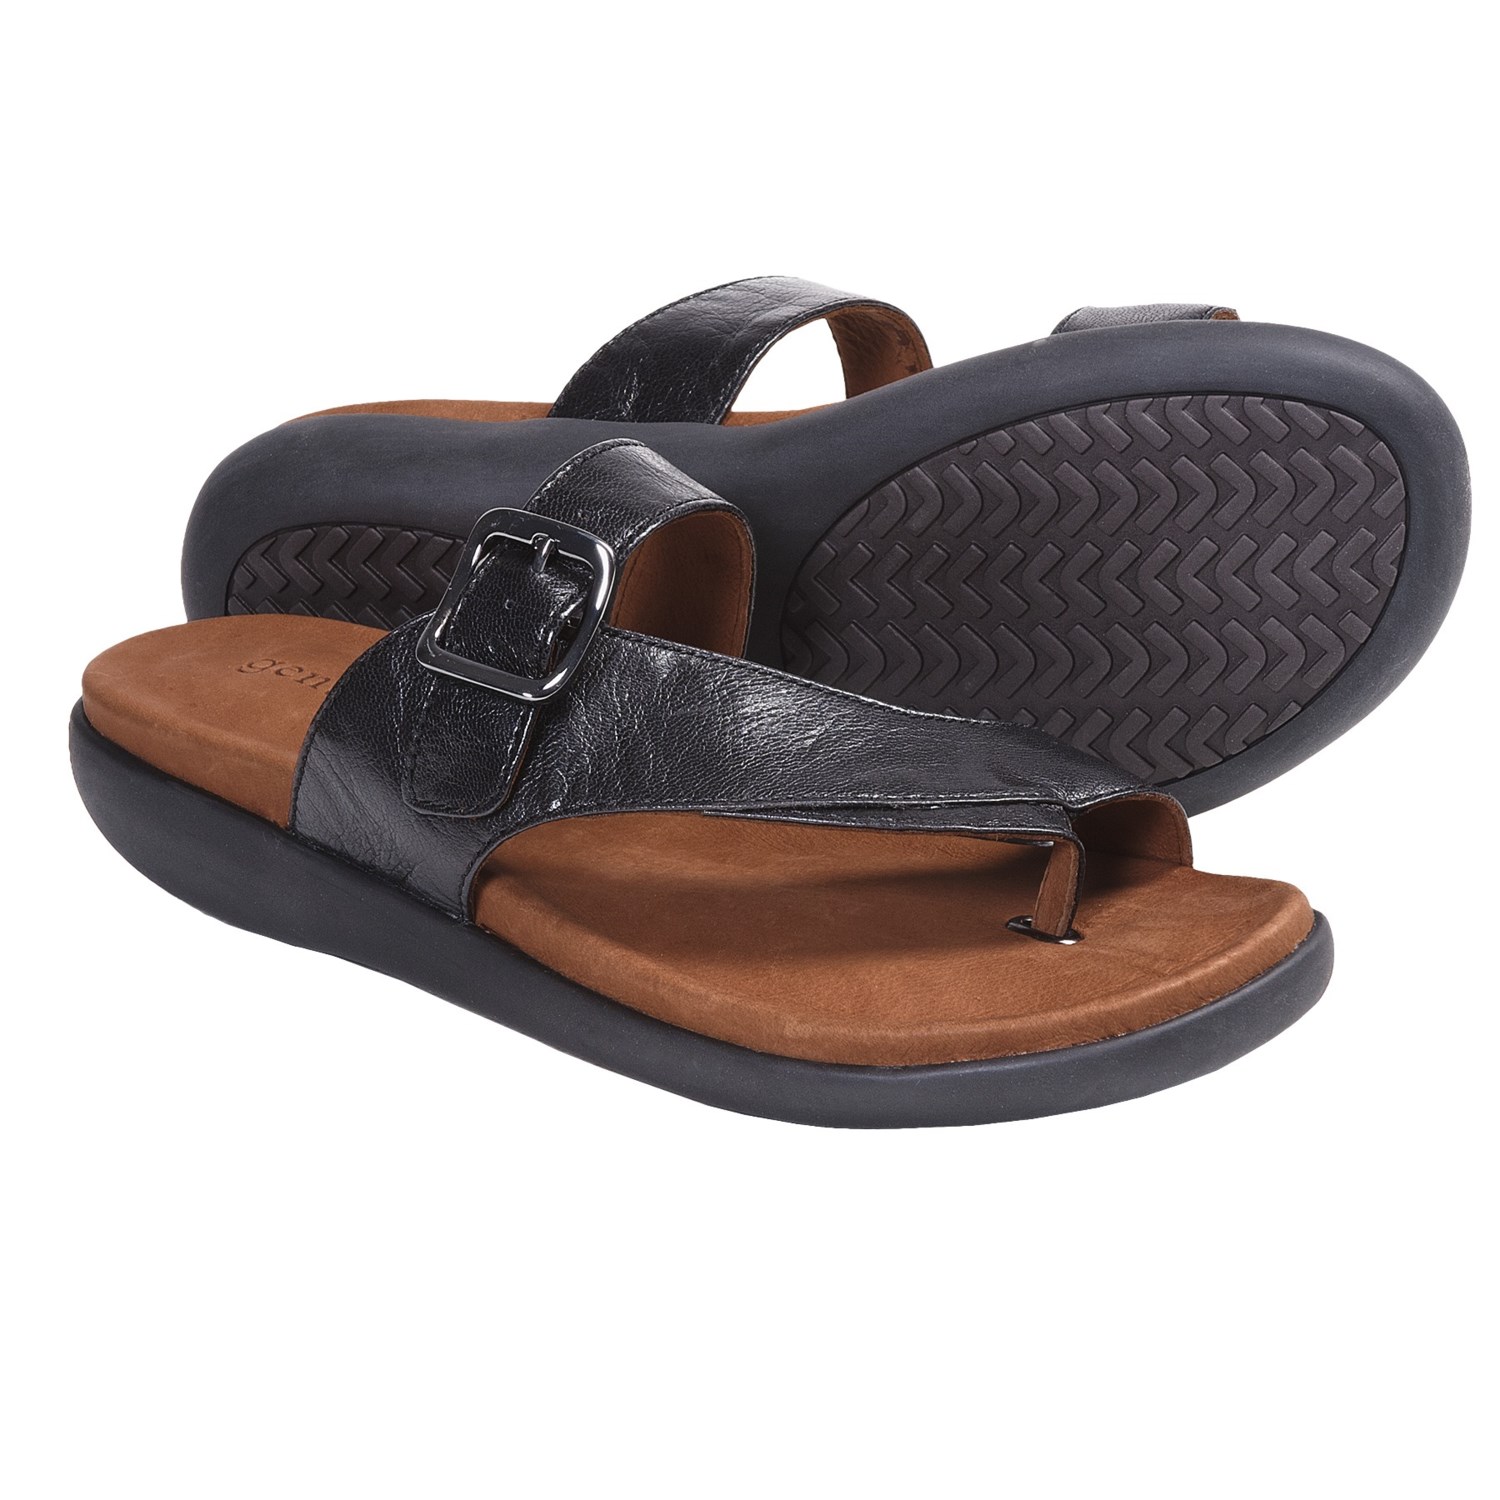 Gentle Souls Seagol Sandals (For Women) 5977G - Save 35%